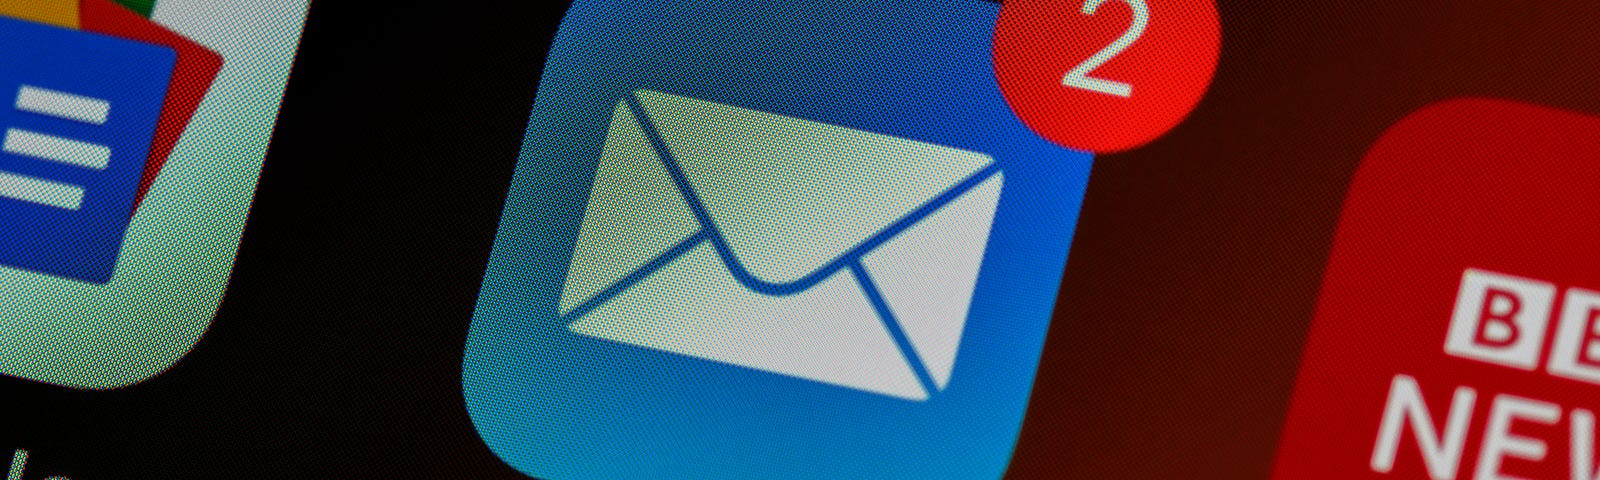 computer screen showing email as one of the applications, Brett Jordan, Unsplash